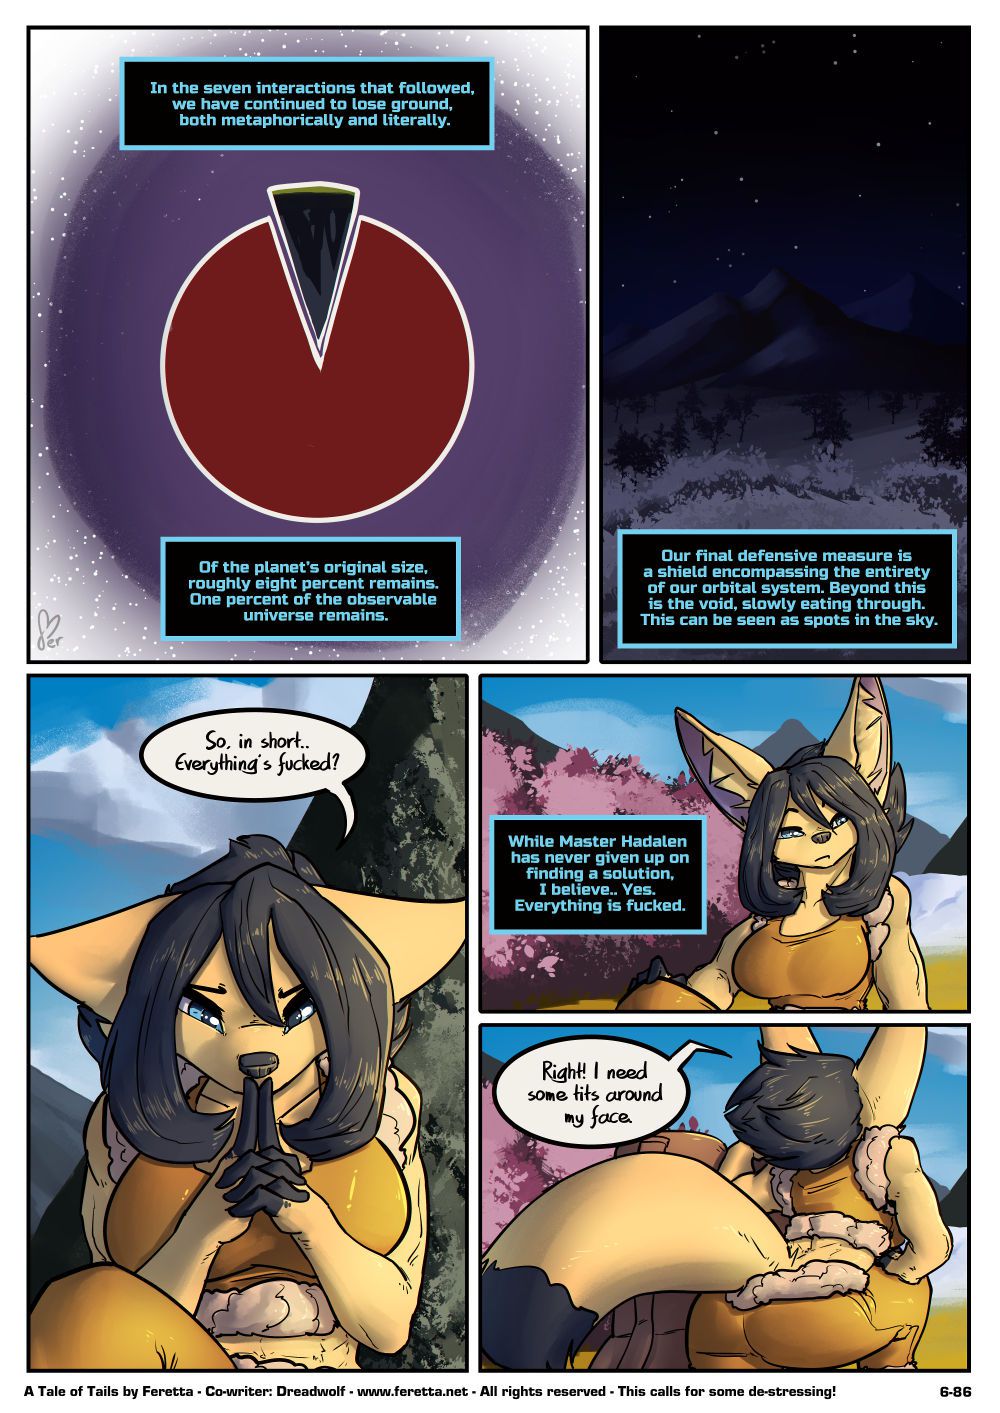 [Feretta] A Tale of Tails: Chapter 6 - Paths converge (ongoing) 89